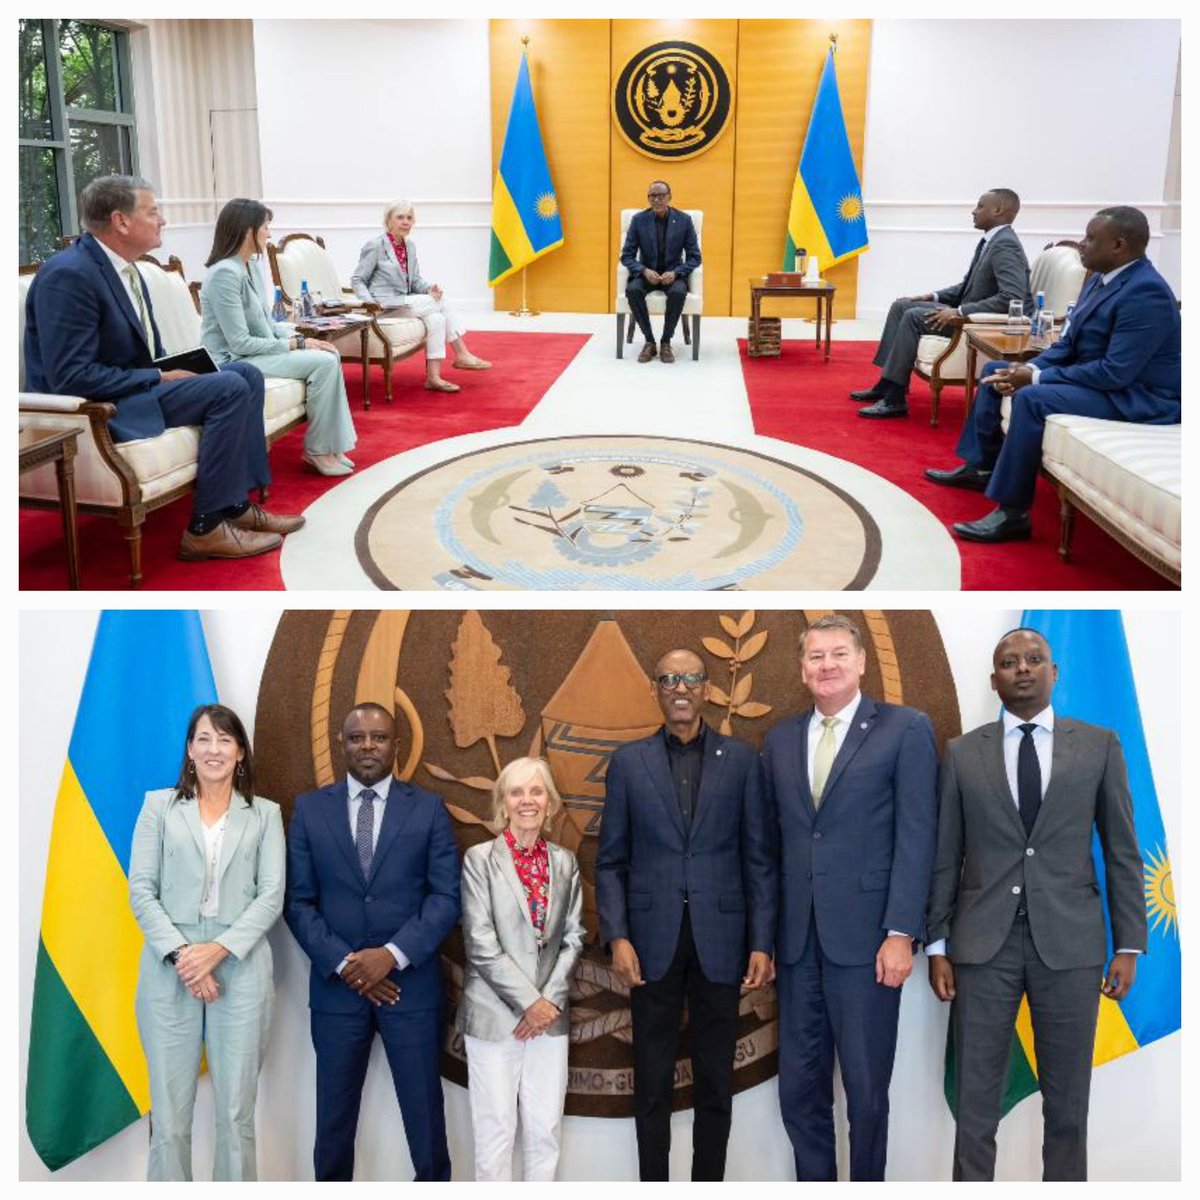 Earlier today, together with @operationsmile co-founder and CEO, we have been honored to be received by H.E @PaulKagame @UrugwiroVillage. Thank u your excellency for the time, encouragements and opening a bigger vision for this partnership #ImprovingAccessToSurgery for #Rwandans